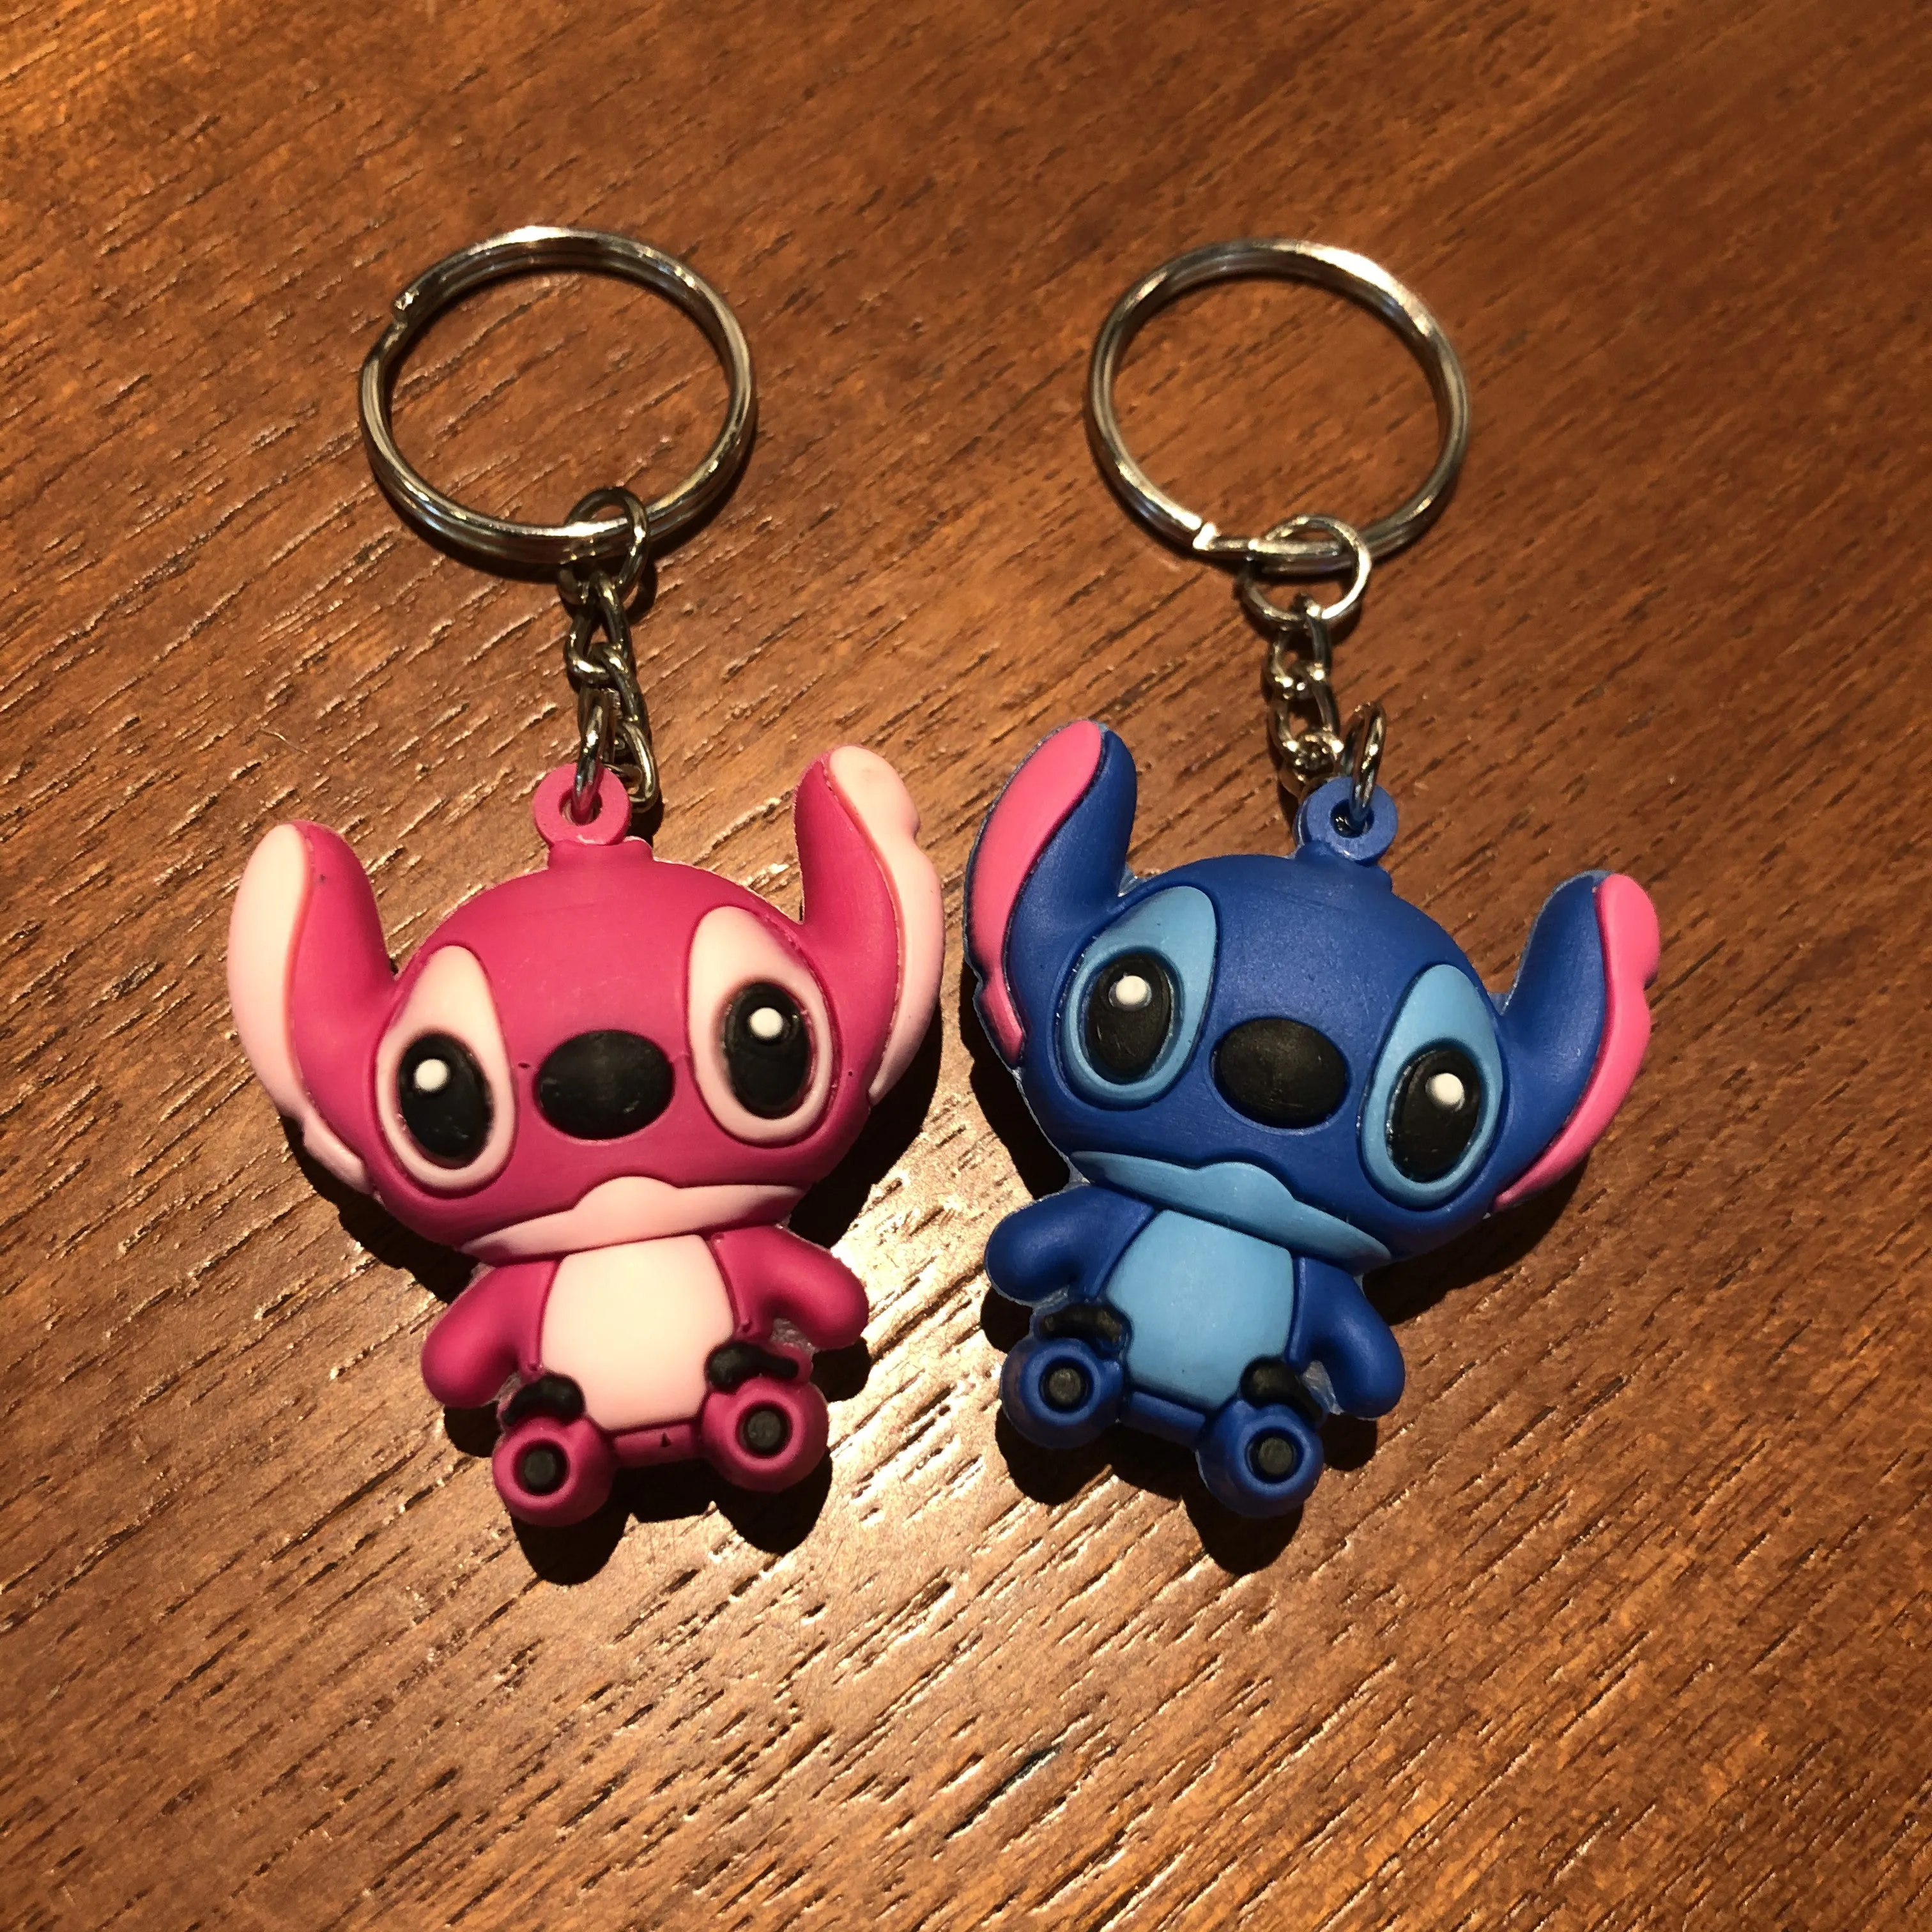 Wholesale 40Pcs/lot 3D Anime Lilo&ampstitch Keychain Cartoon Doll Monster Key Chains Cute Keyring Car charms key Holder kids Gifts |